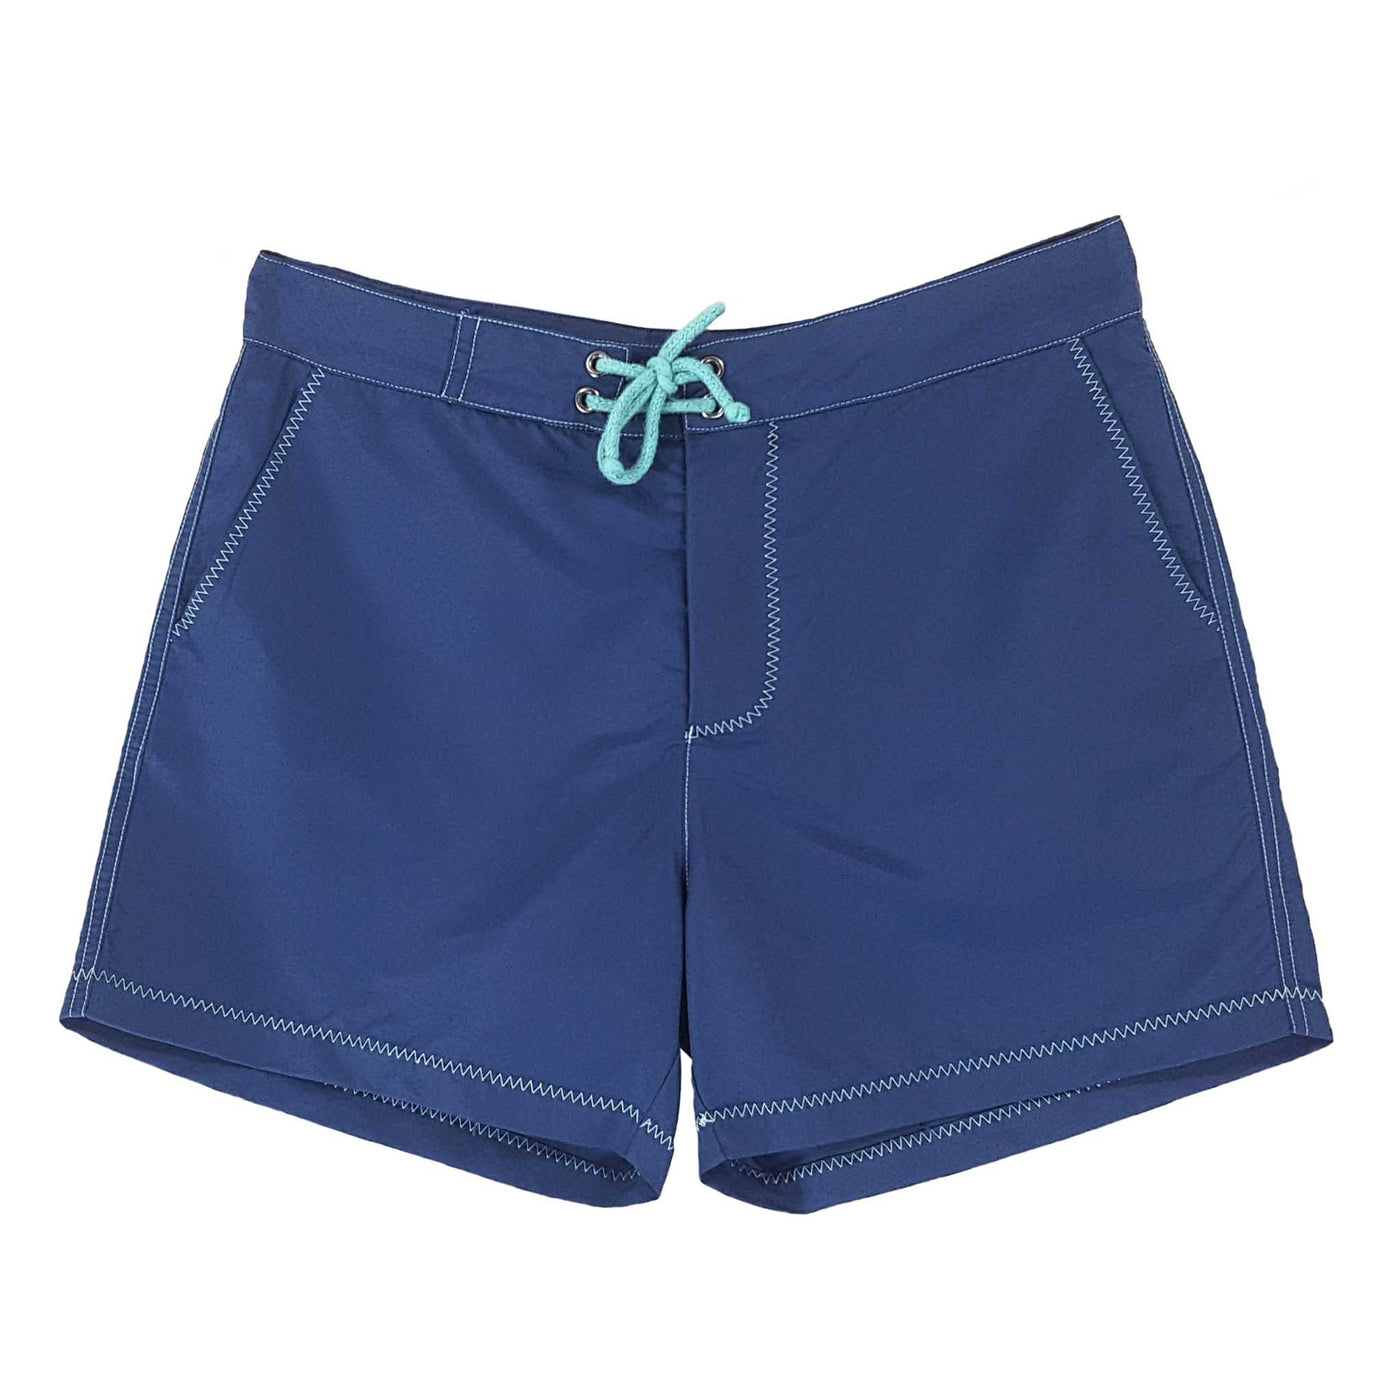 Navy swim shorts with turquoise stitching for men